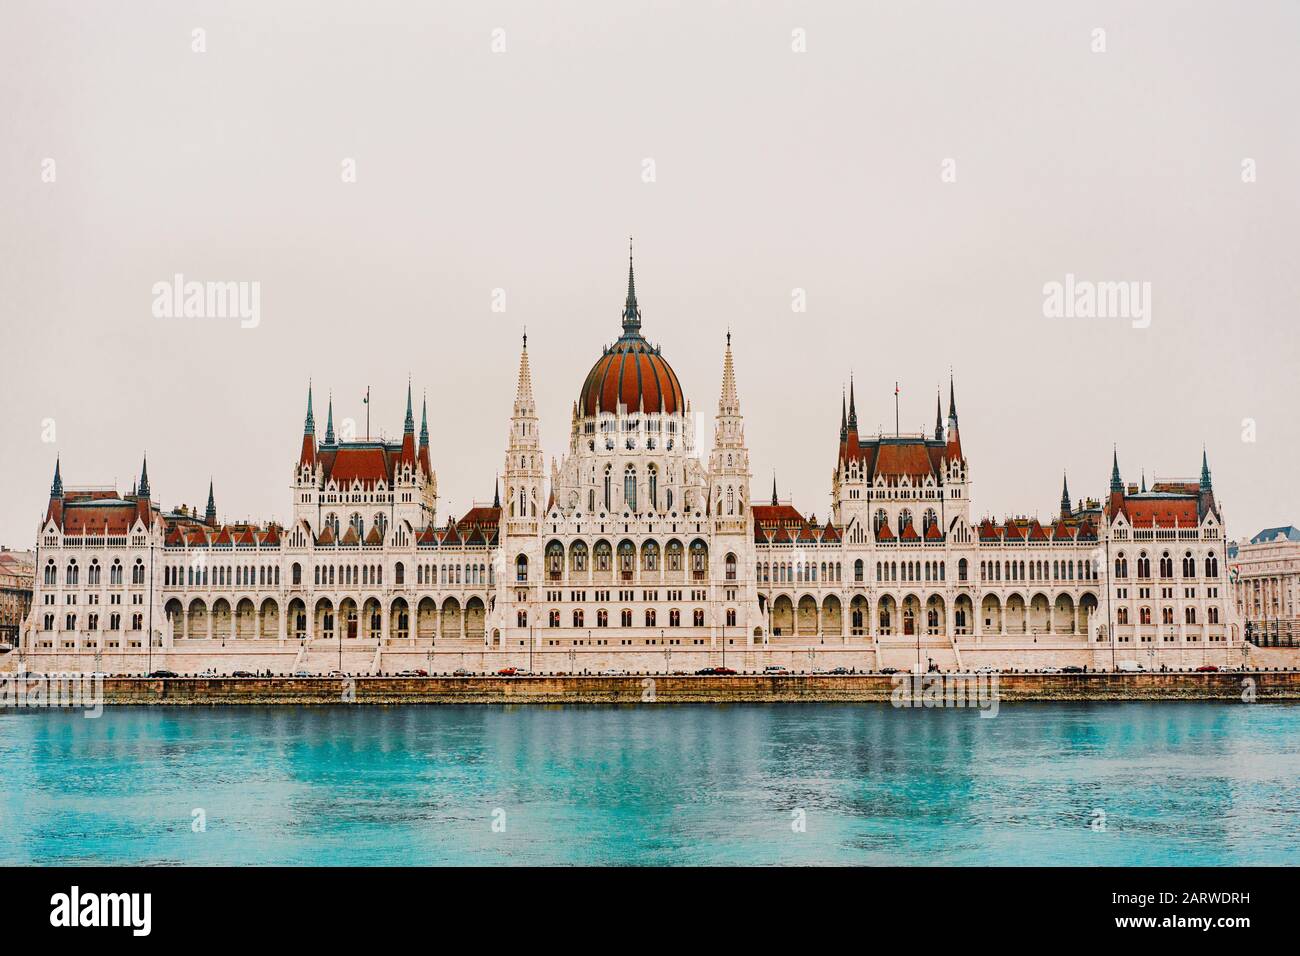 View to Hungarian Parliament Danube River. Beautiful scene of ancient gothic architecture. Stock Photo